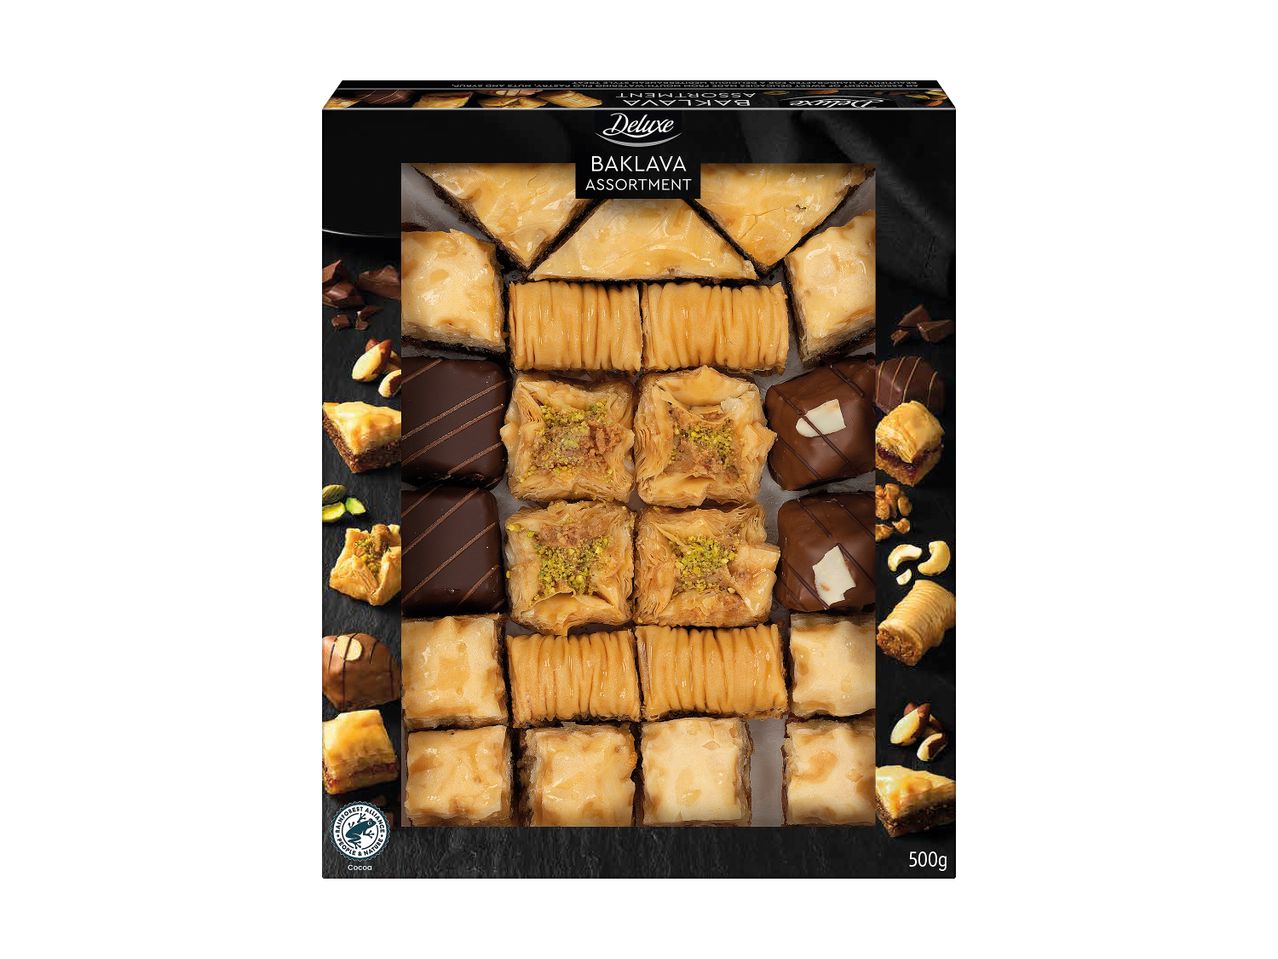 Go to full screen view: Deluxe Large Baklava Assortment - Image 1